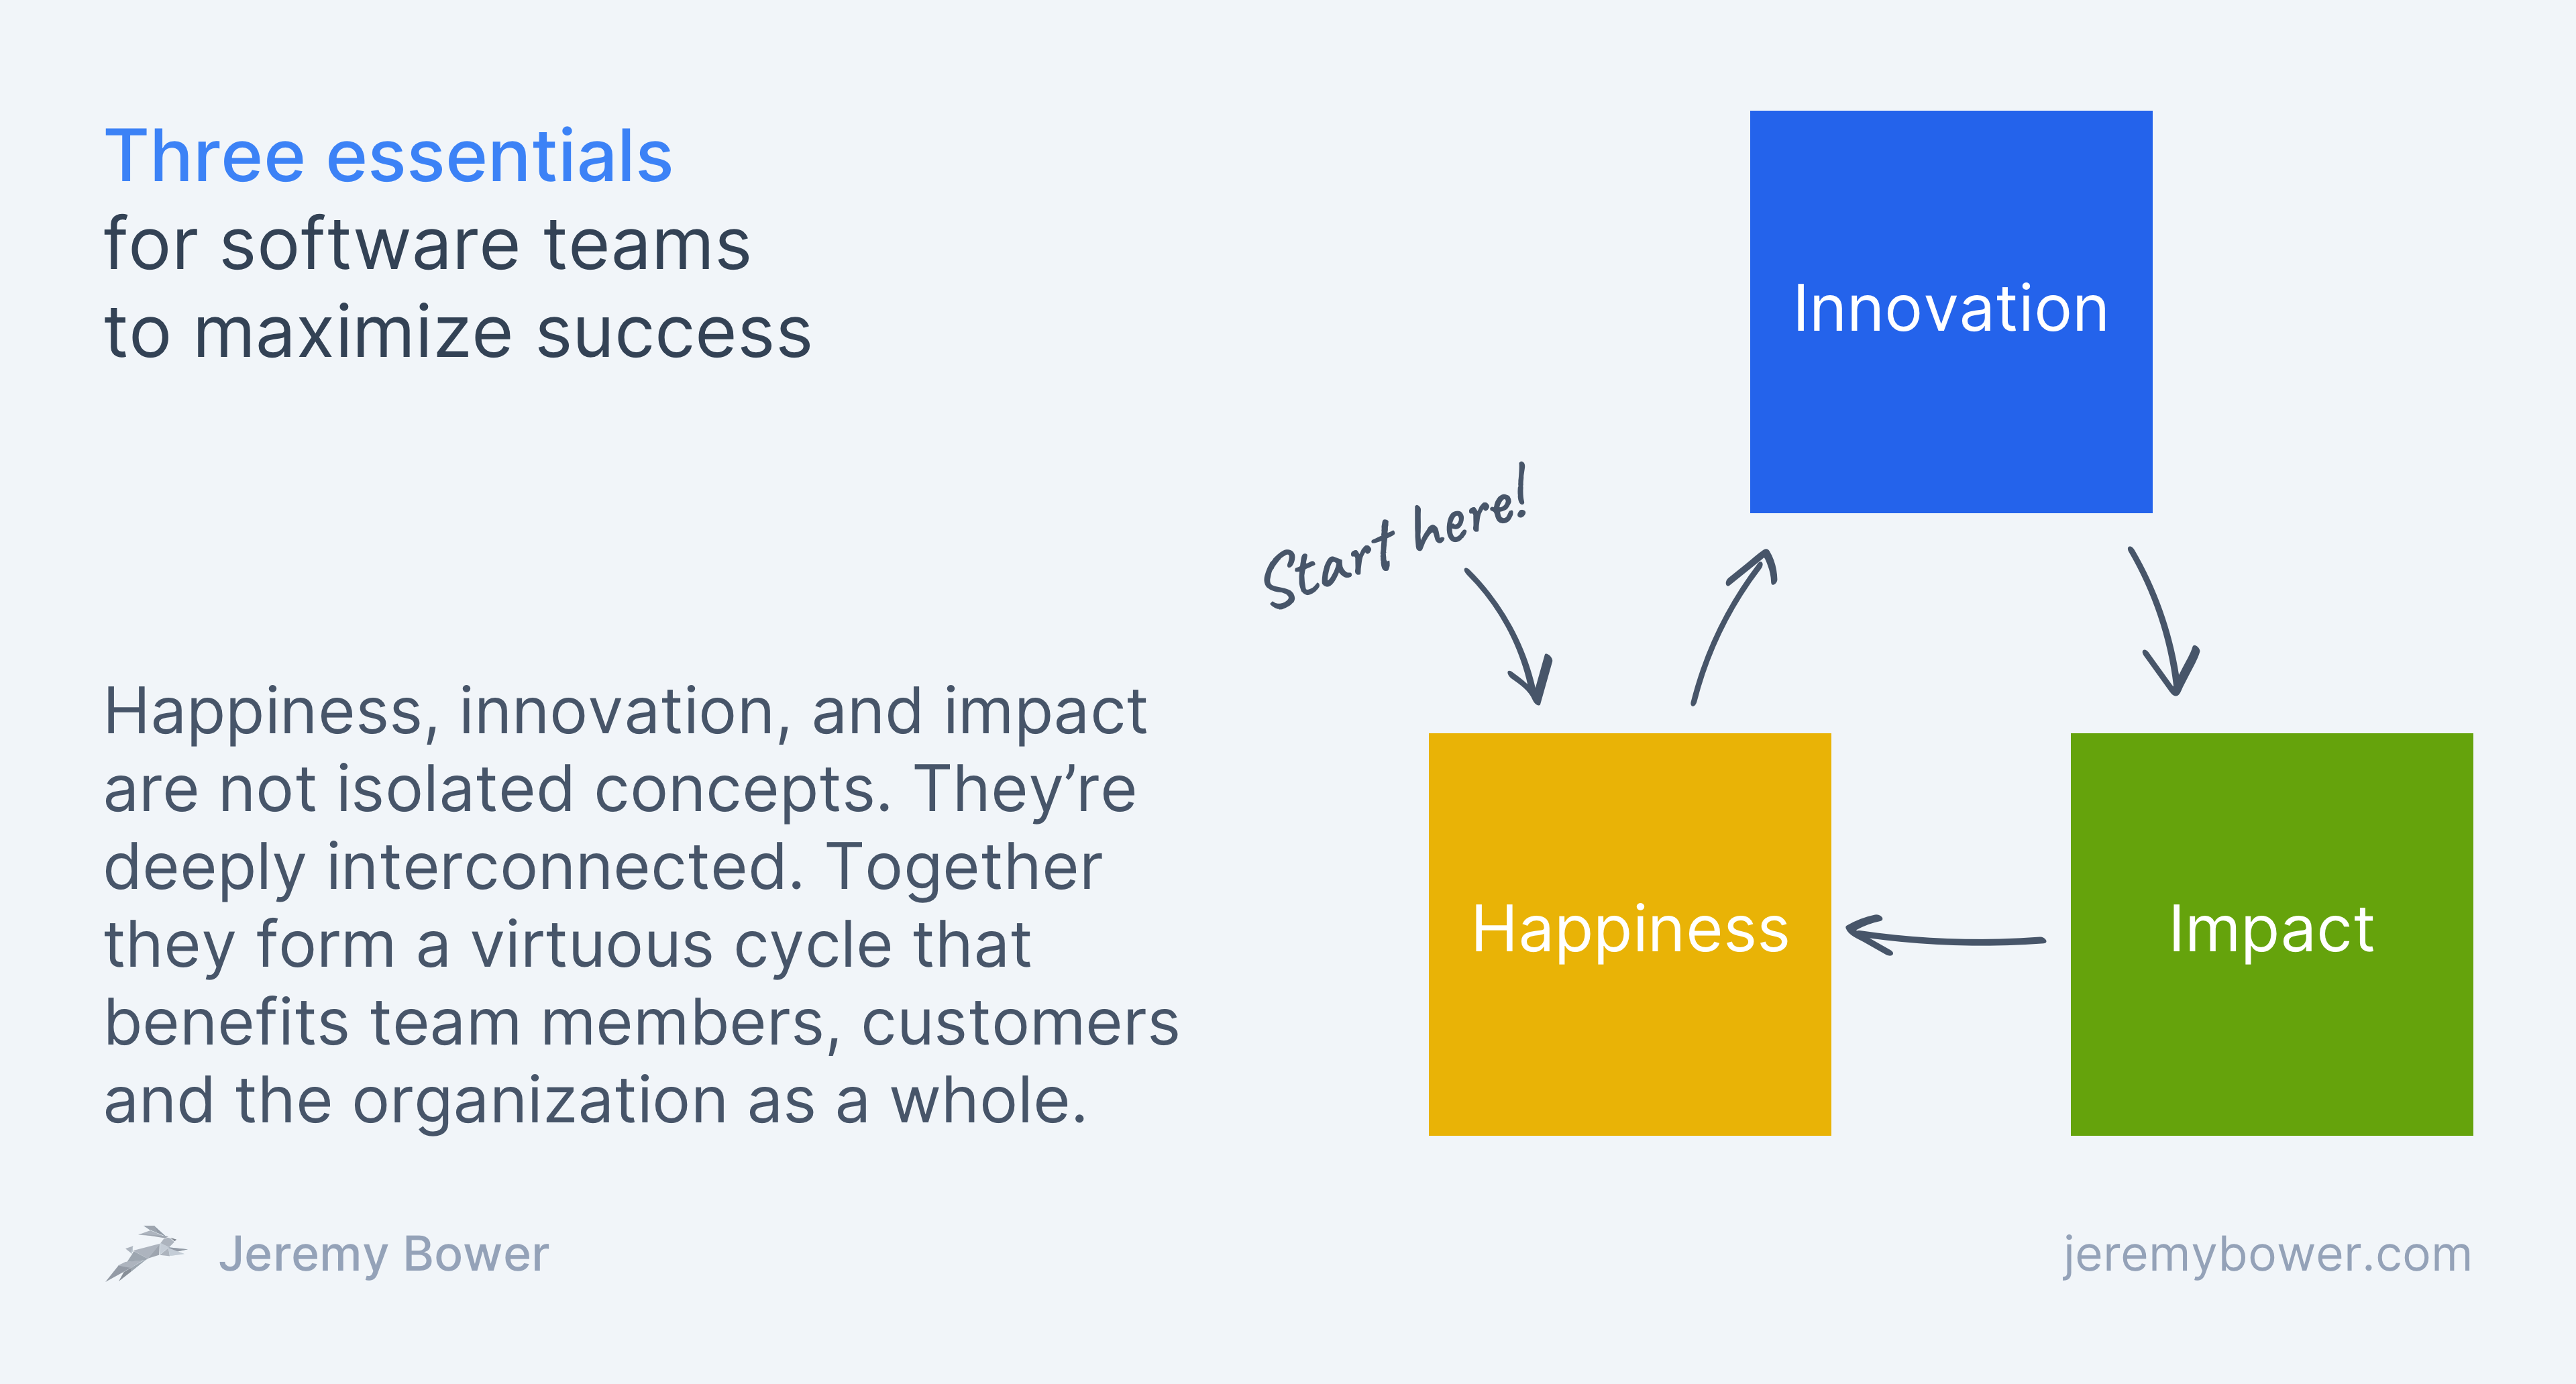 Relationship between happiness, innovation and impact